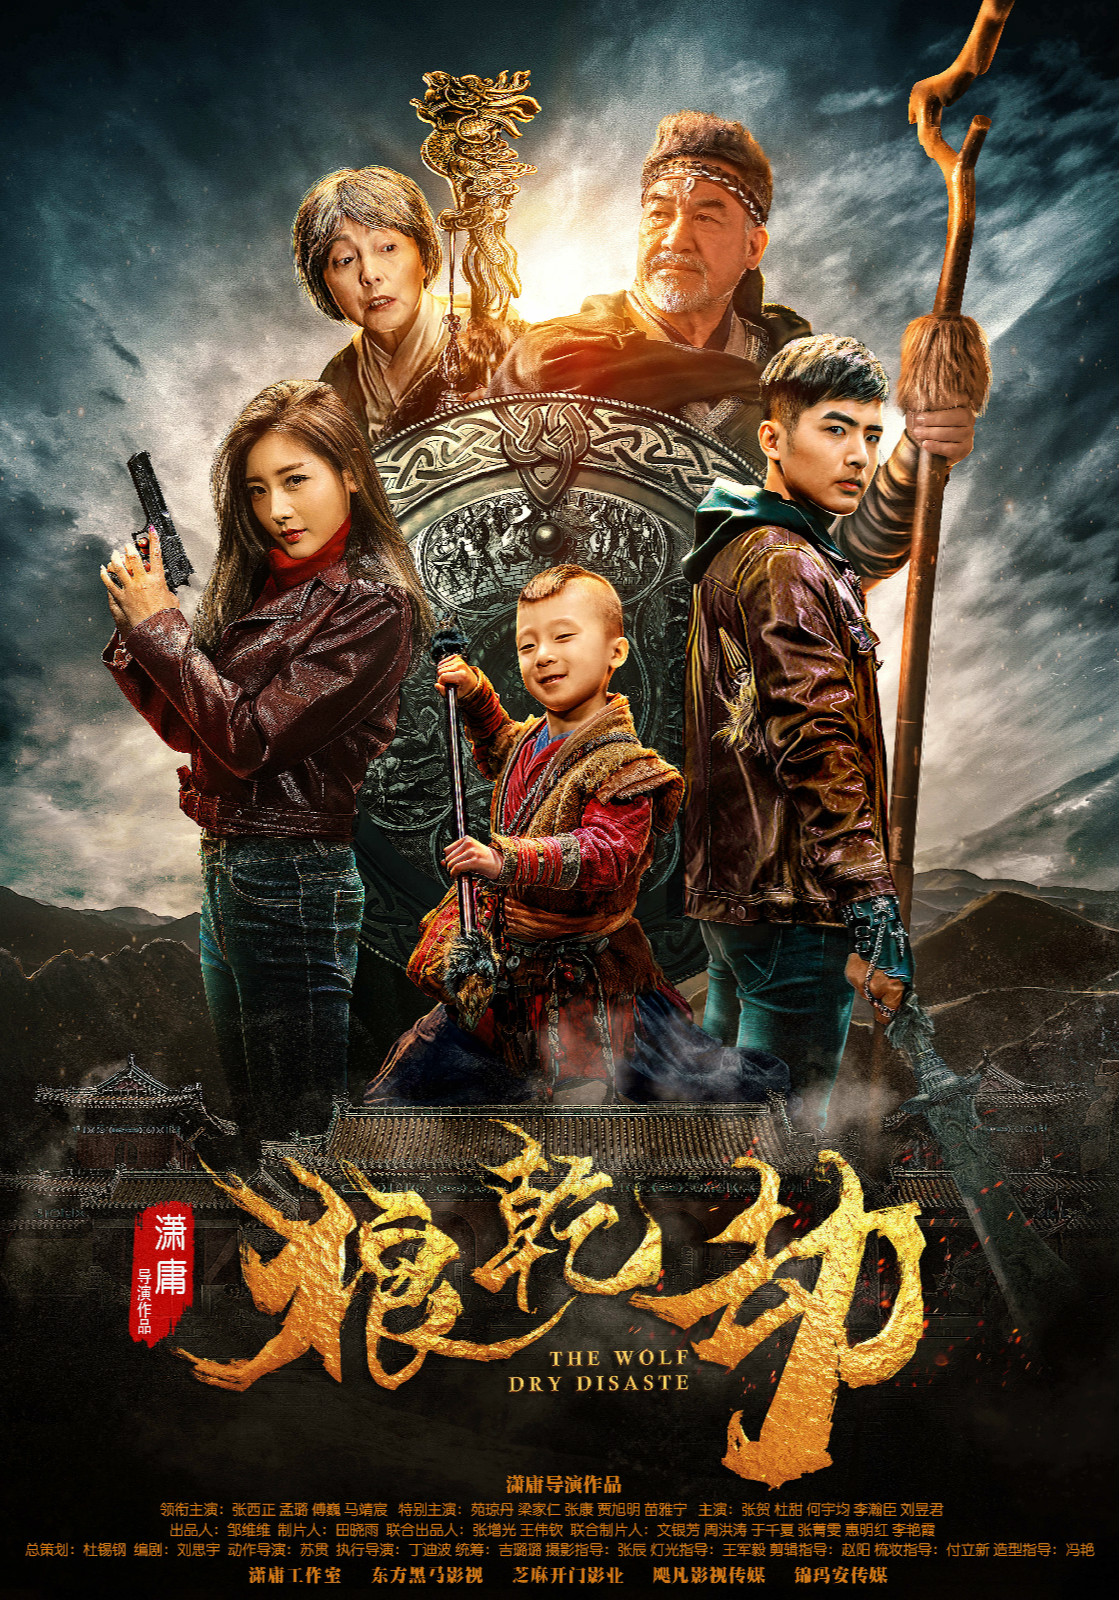 Poster Phim Lang Càn Kiếp (The Wolf Dry Disaster)